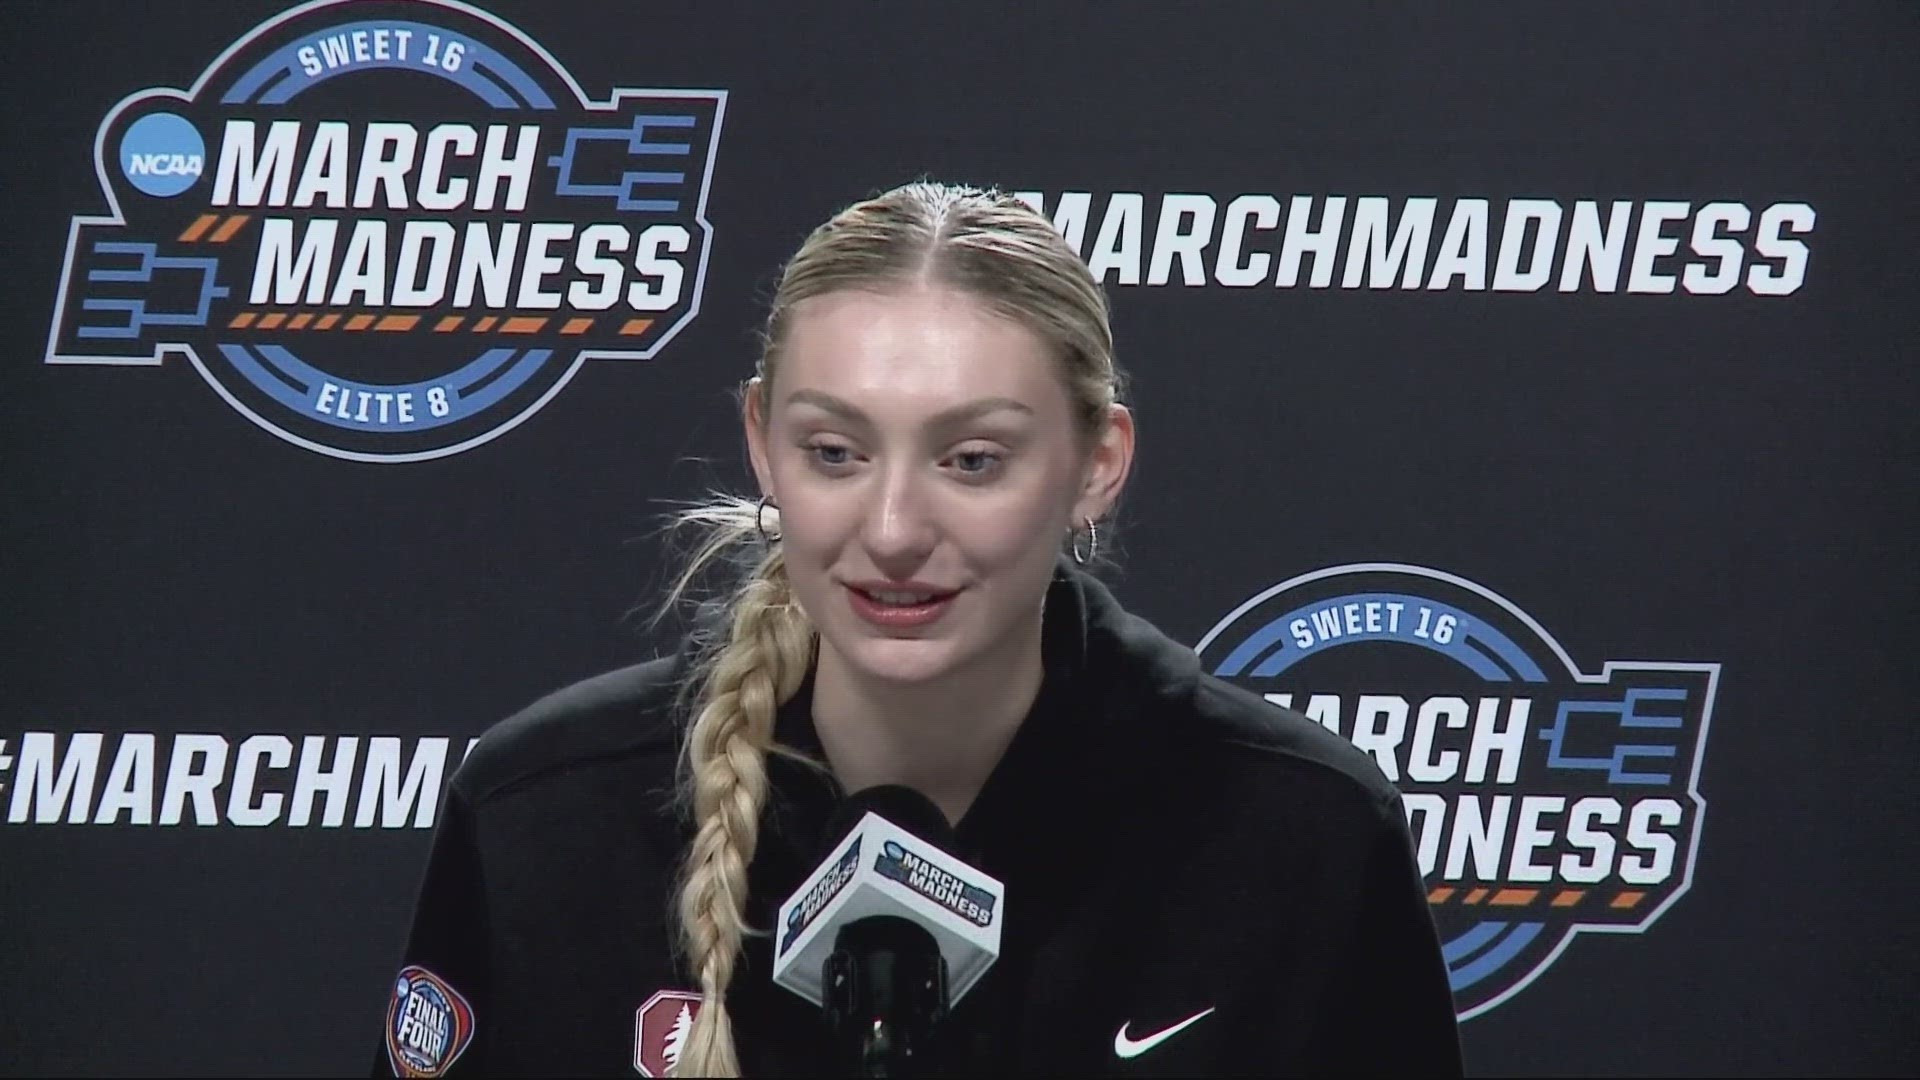 The women's NCAA Tournament is in Portland this weekend, with 8 teams from all over the country, some with local connections, like Beaverton's Cameron Brink.